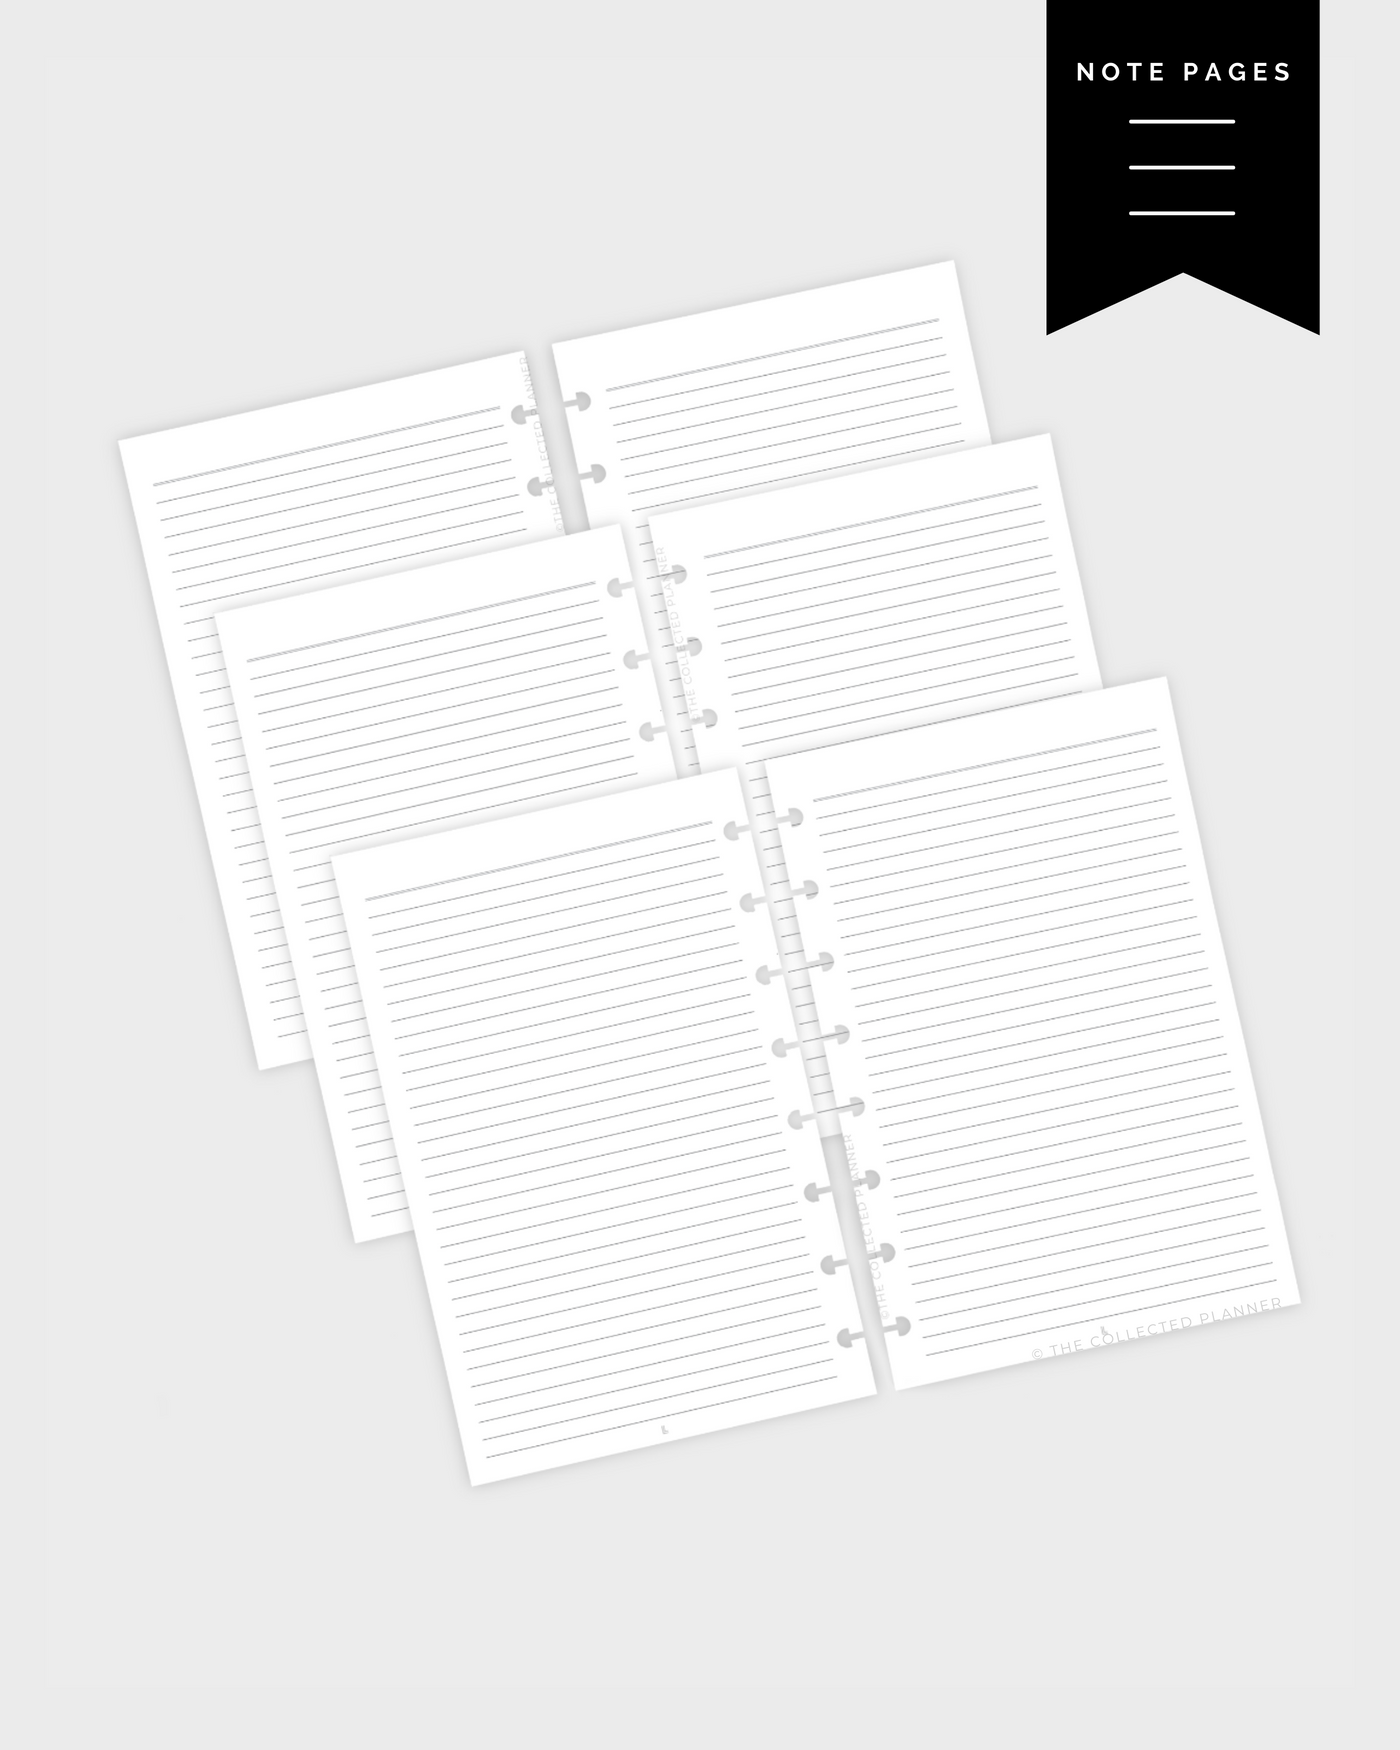 Half Letter Discbound | Lined Page Note Taking Inserts